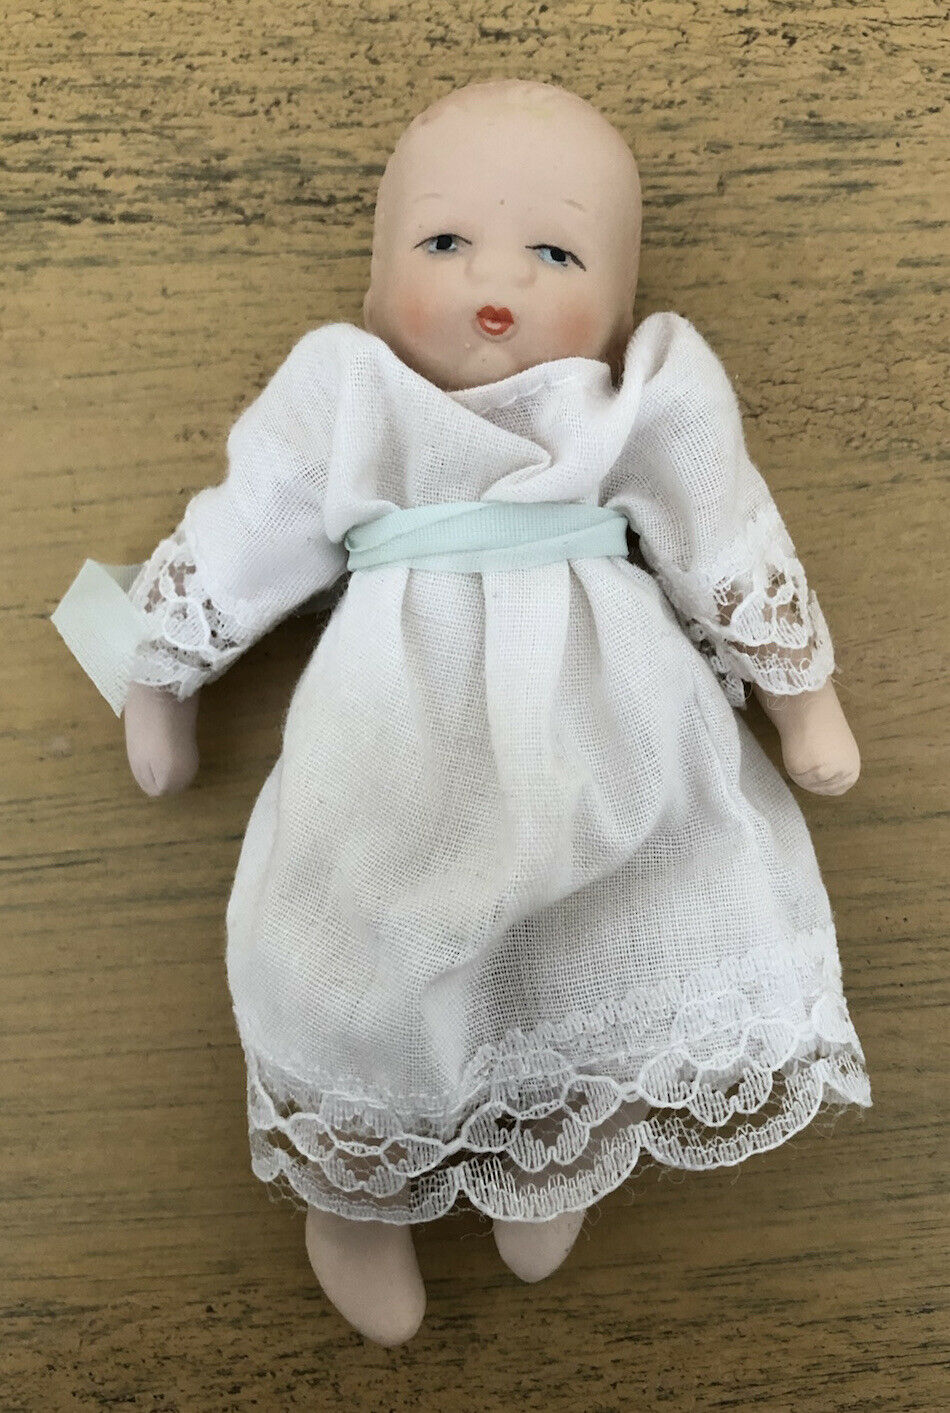 Vintage Bisque Doll Baby Padded Body Jointed Arms Legs